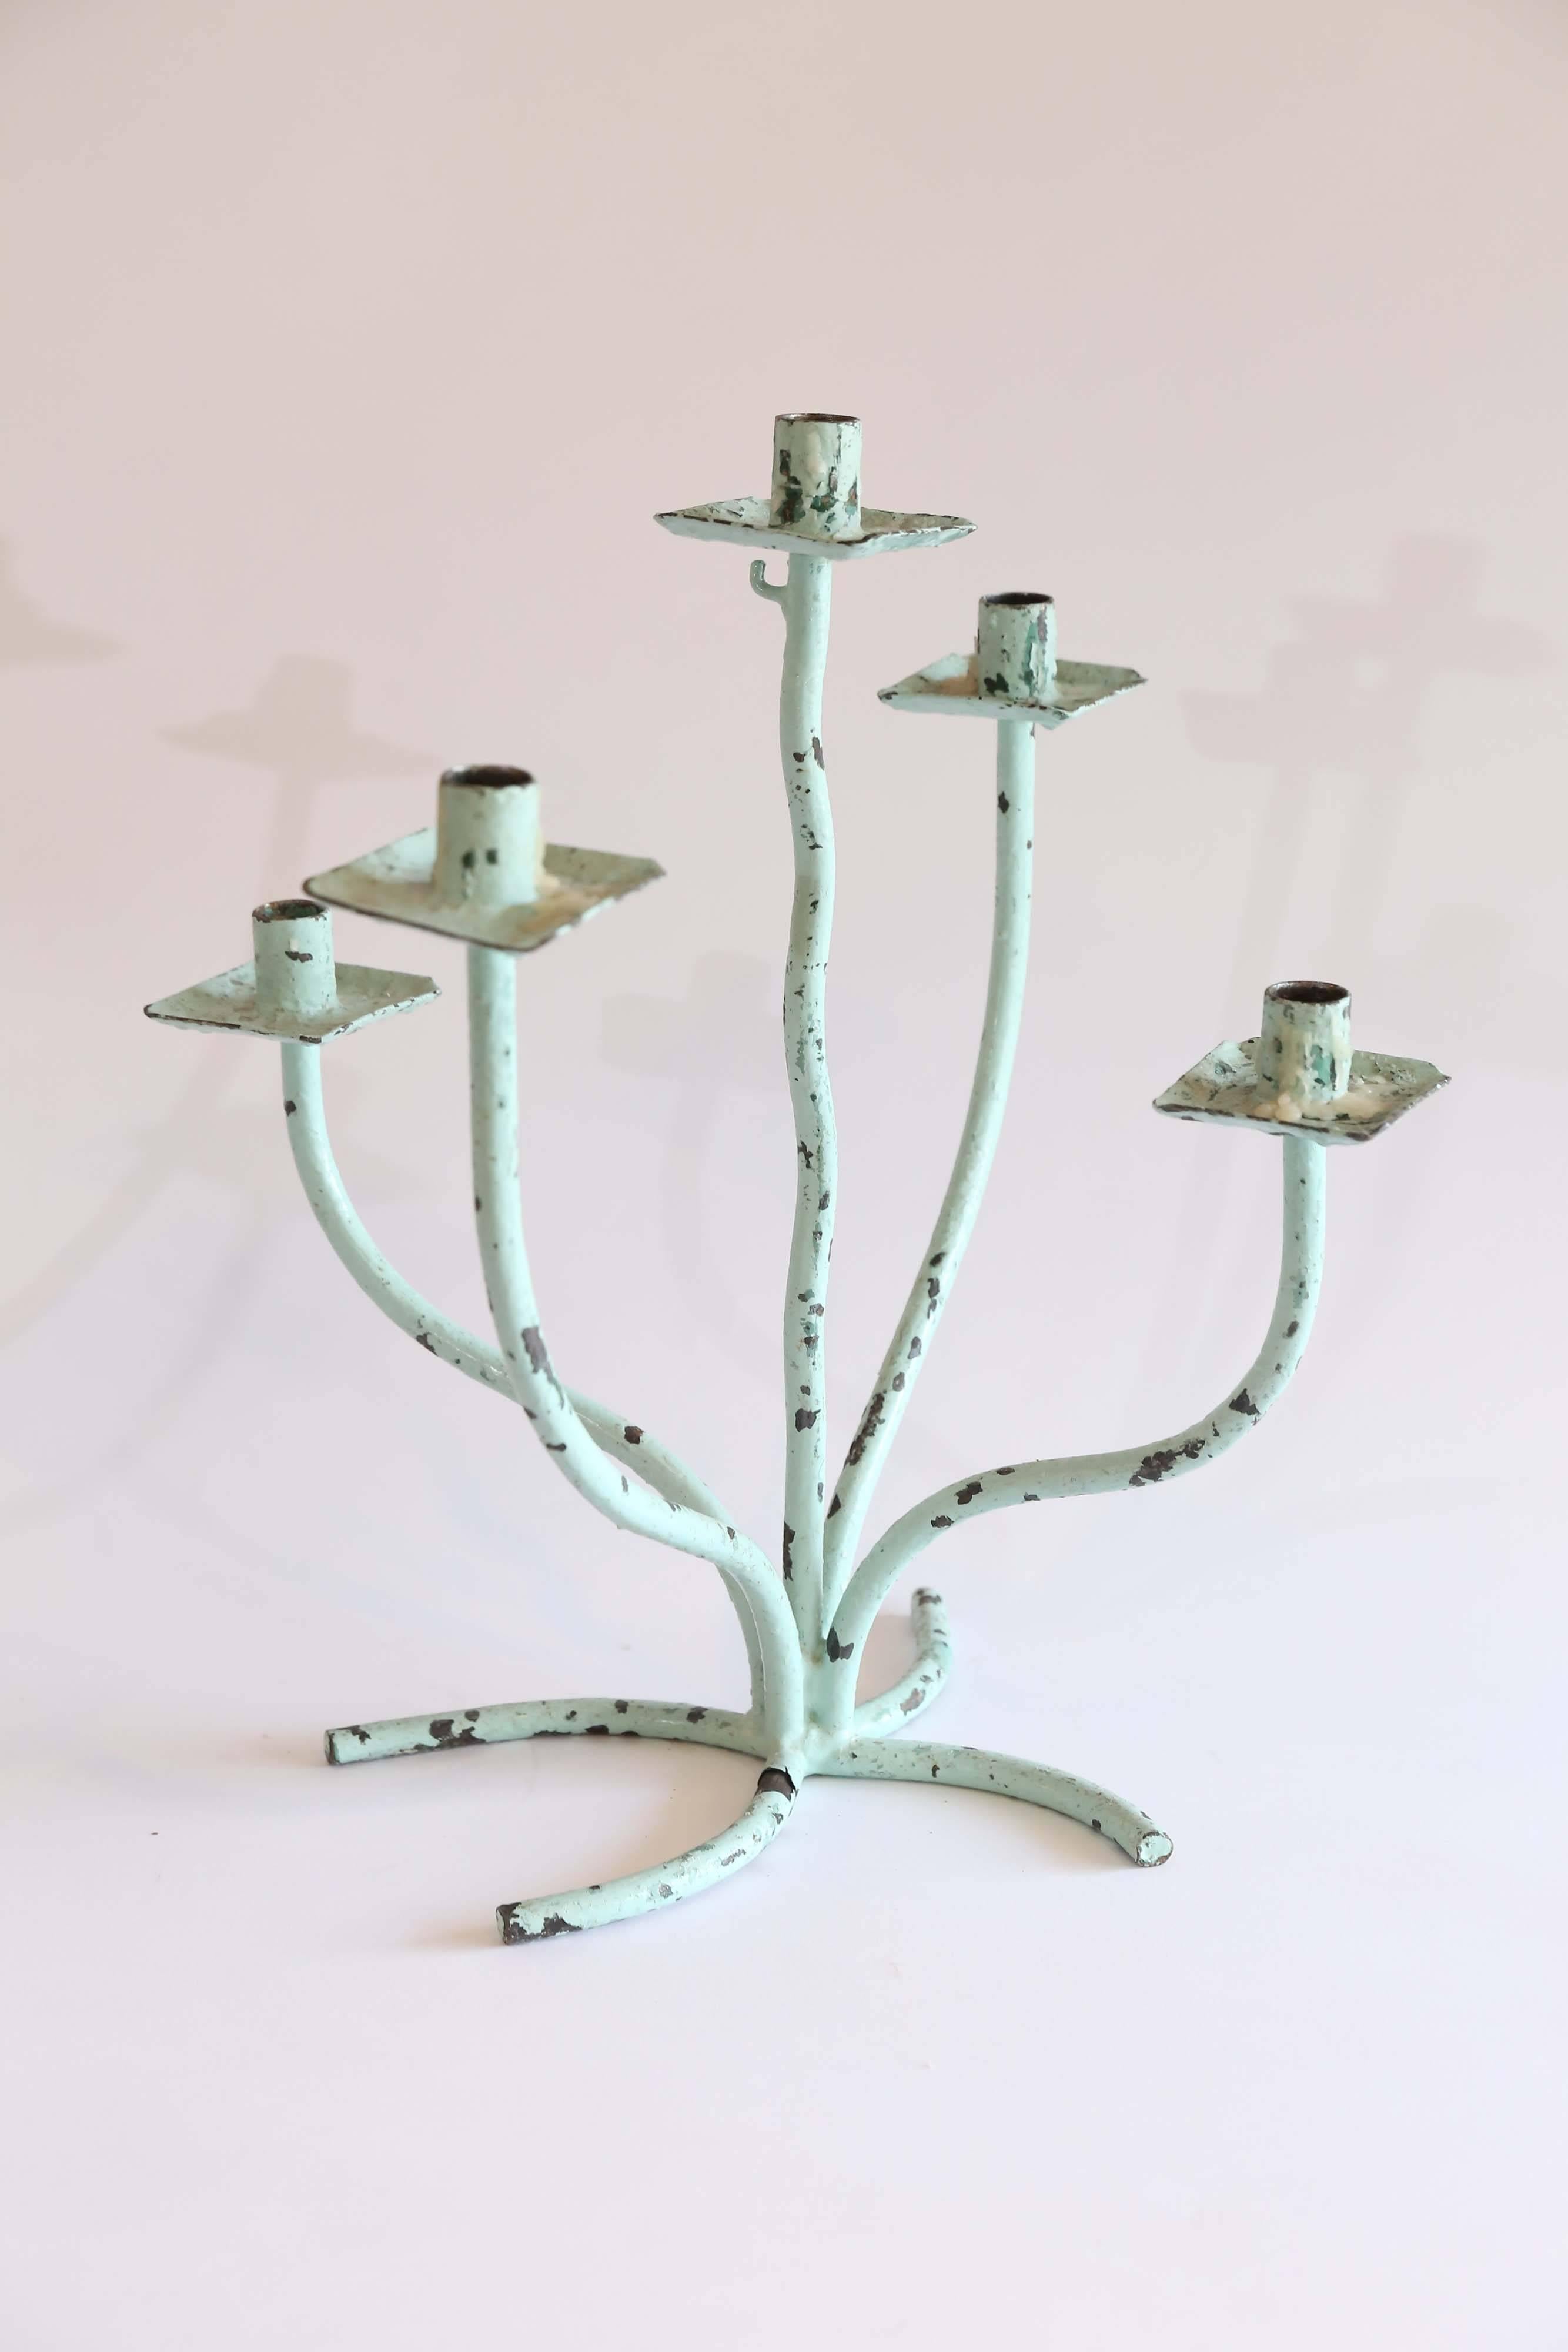 A pair of eccentric wrought iron candelabra from France. With chippy old seafoam green paint, the five free-form arms extend up from a four pronged base. Quirky and fun, there are two others available and sold separately- one seafoam green and one